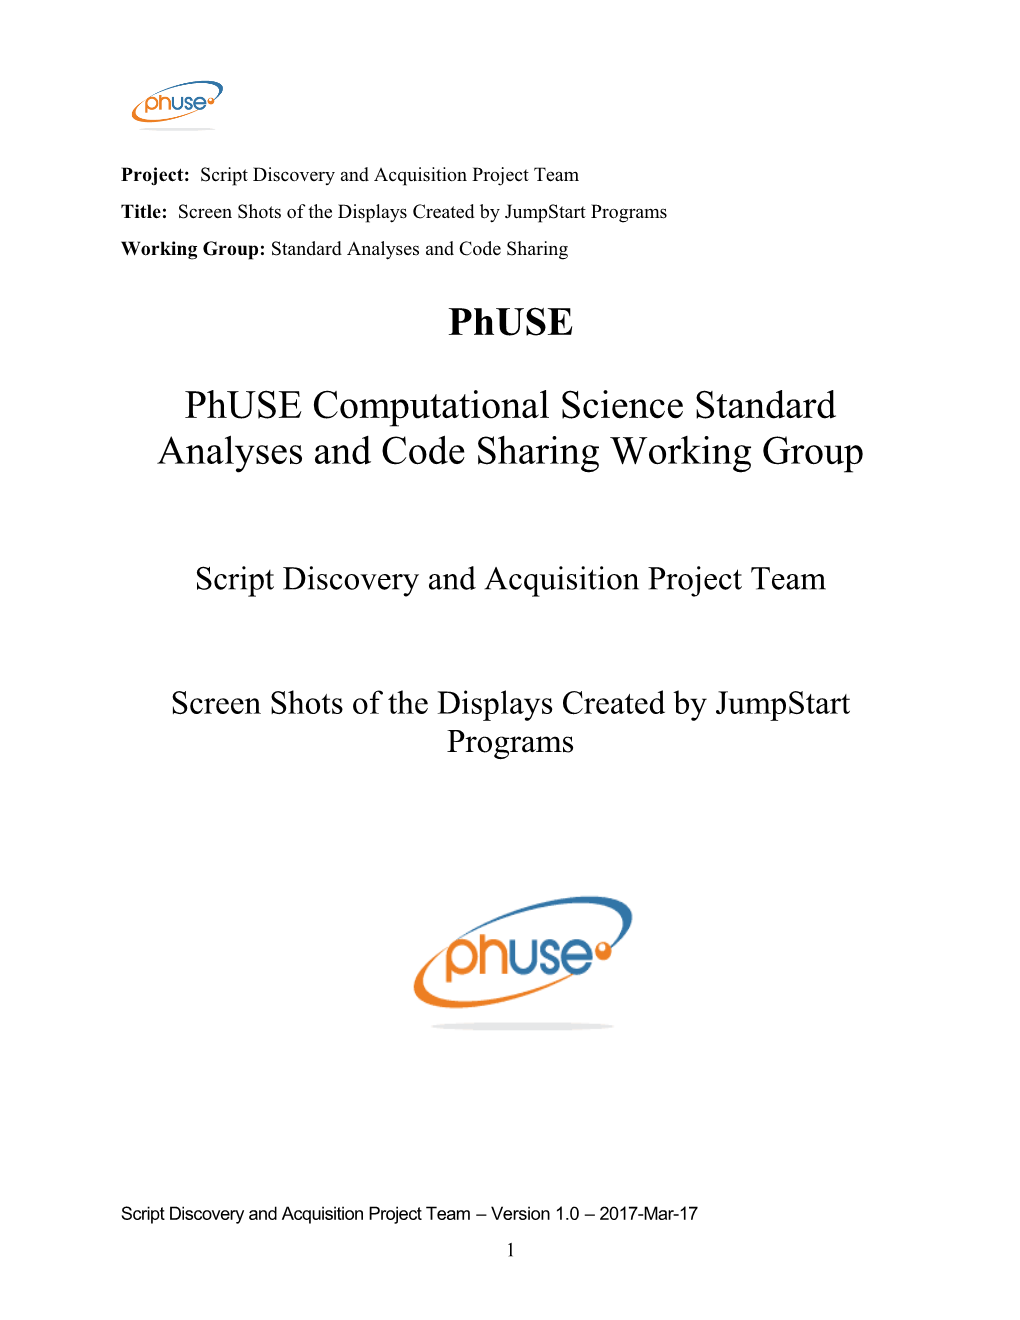 Phuse Computational Science Standard Analyses and Code Sharing Working Group